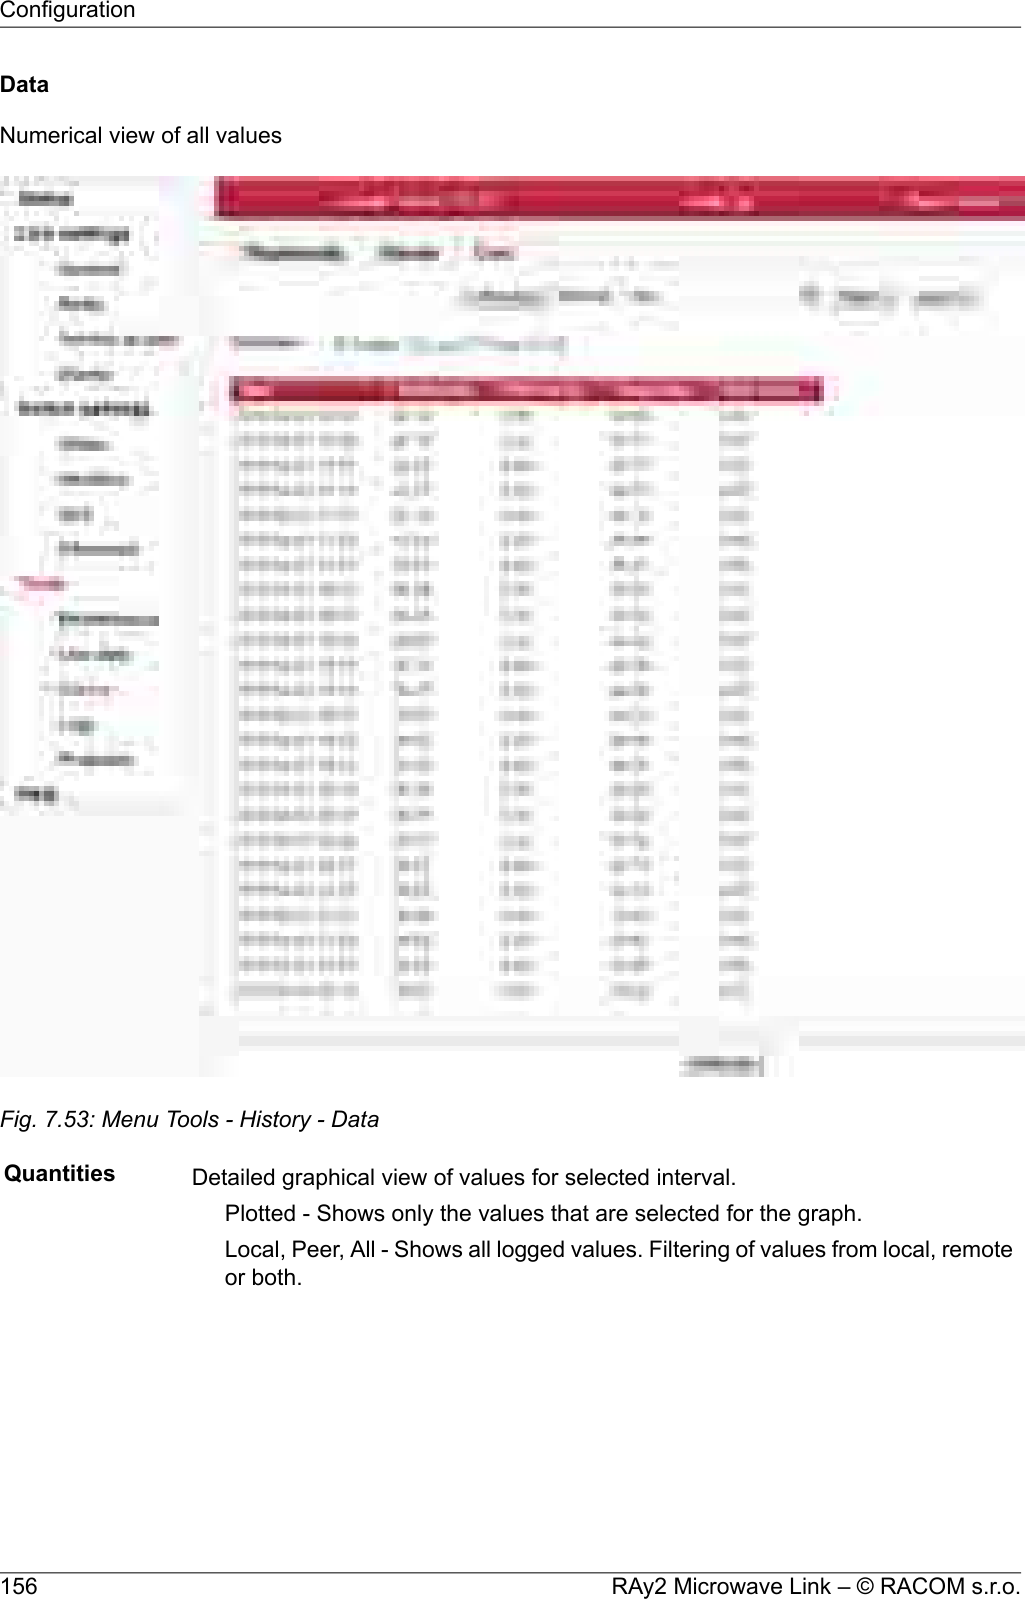 DataNumerical view of all valuesFig. 7.53: Menu Tools - History - DataQuantities Detailed graphical view of values for selected interval.Plotted - Shows only the values that are selected for the graph.Local, Peer, All - Shows all logged values. Filtering of values from local, remoteor both.RAy2 Microwave Link – © RACOM s.r.o.156Configuration